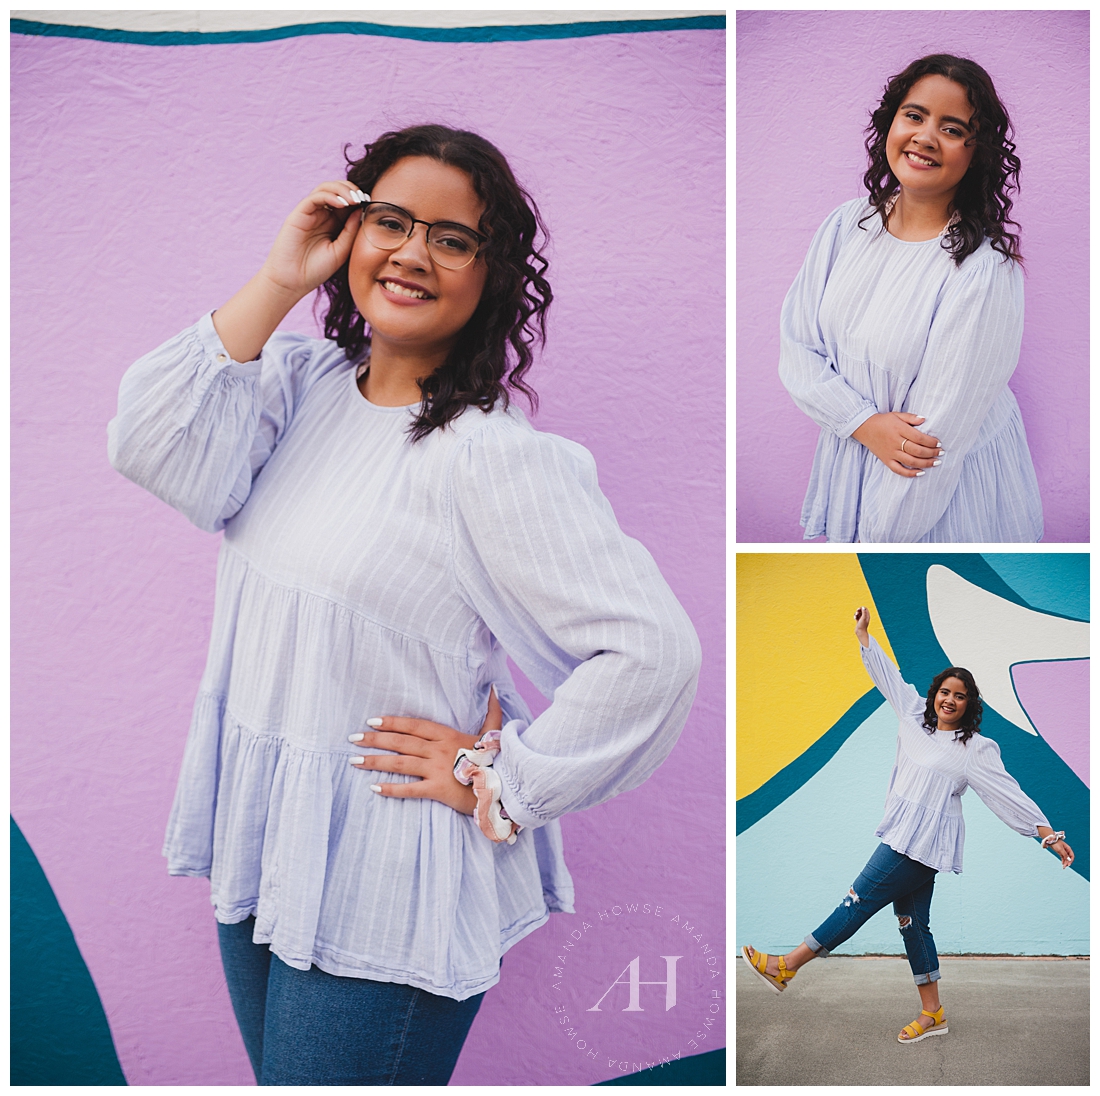 Fun City Portraits with Colorful Murals | Tacoma Senior Portrait Location Ideas for Seniors and Photographers, Urban Portrait Inspiration, How to Style a Senior Portrait Session in the City | Photographed by the Best Tacoma Senior Portrait Photographer Amanda Howse